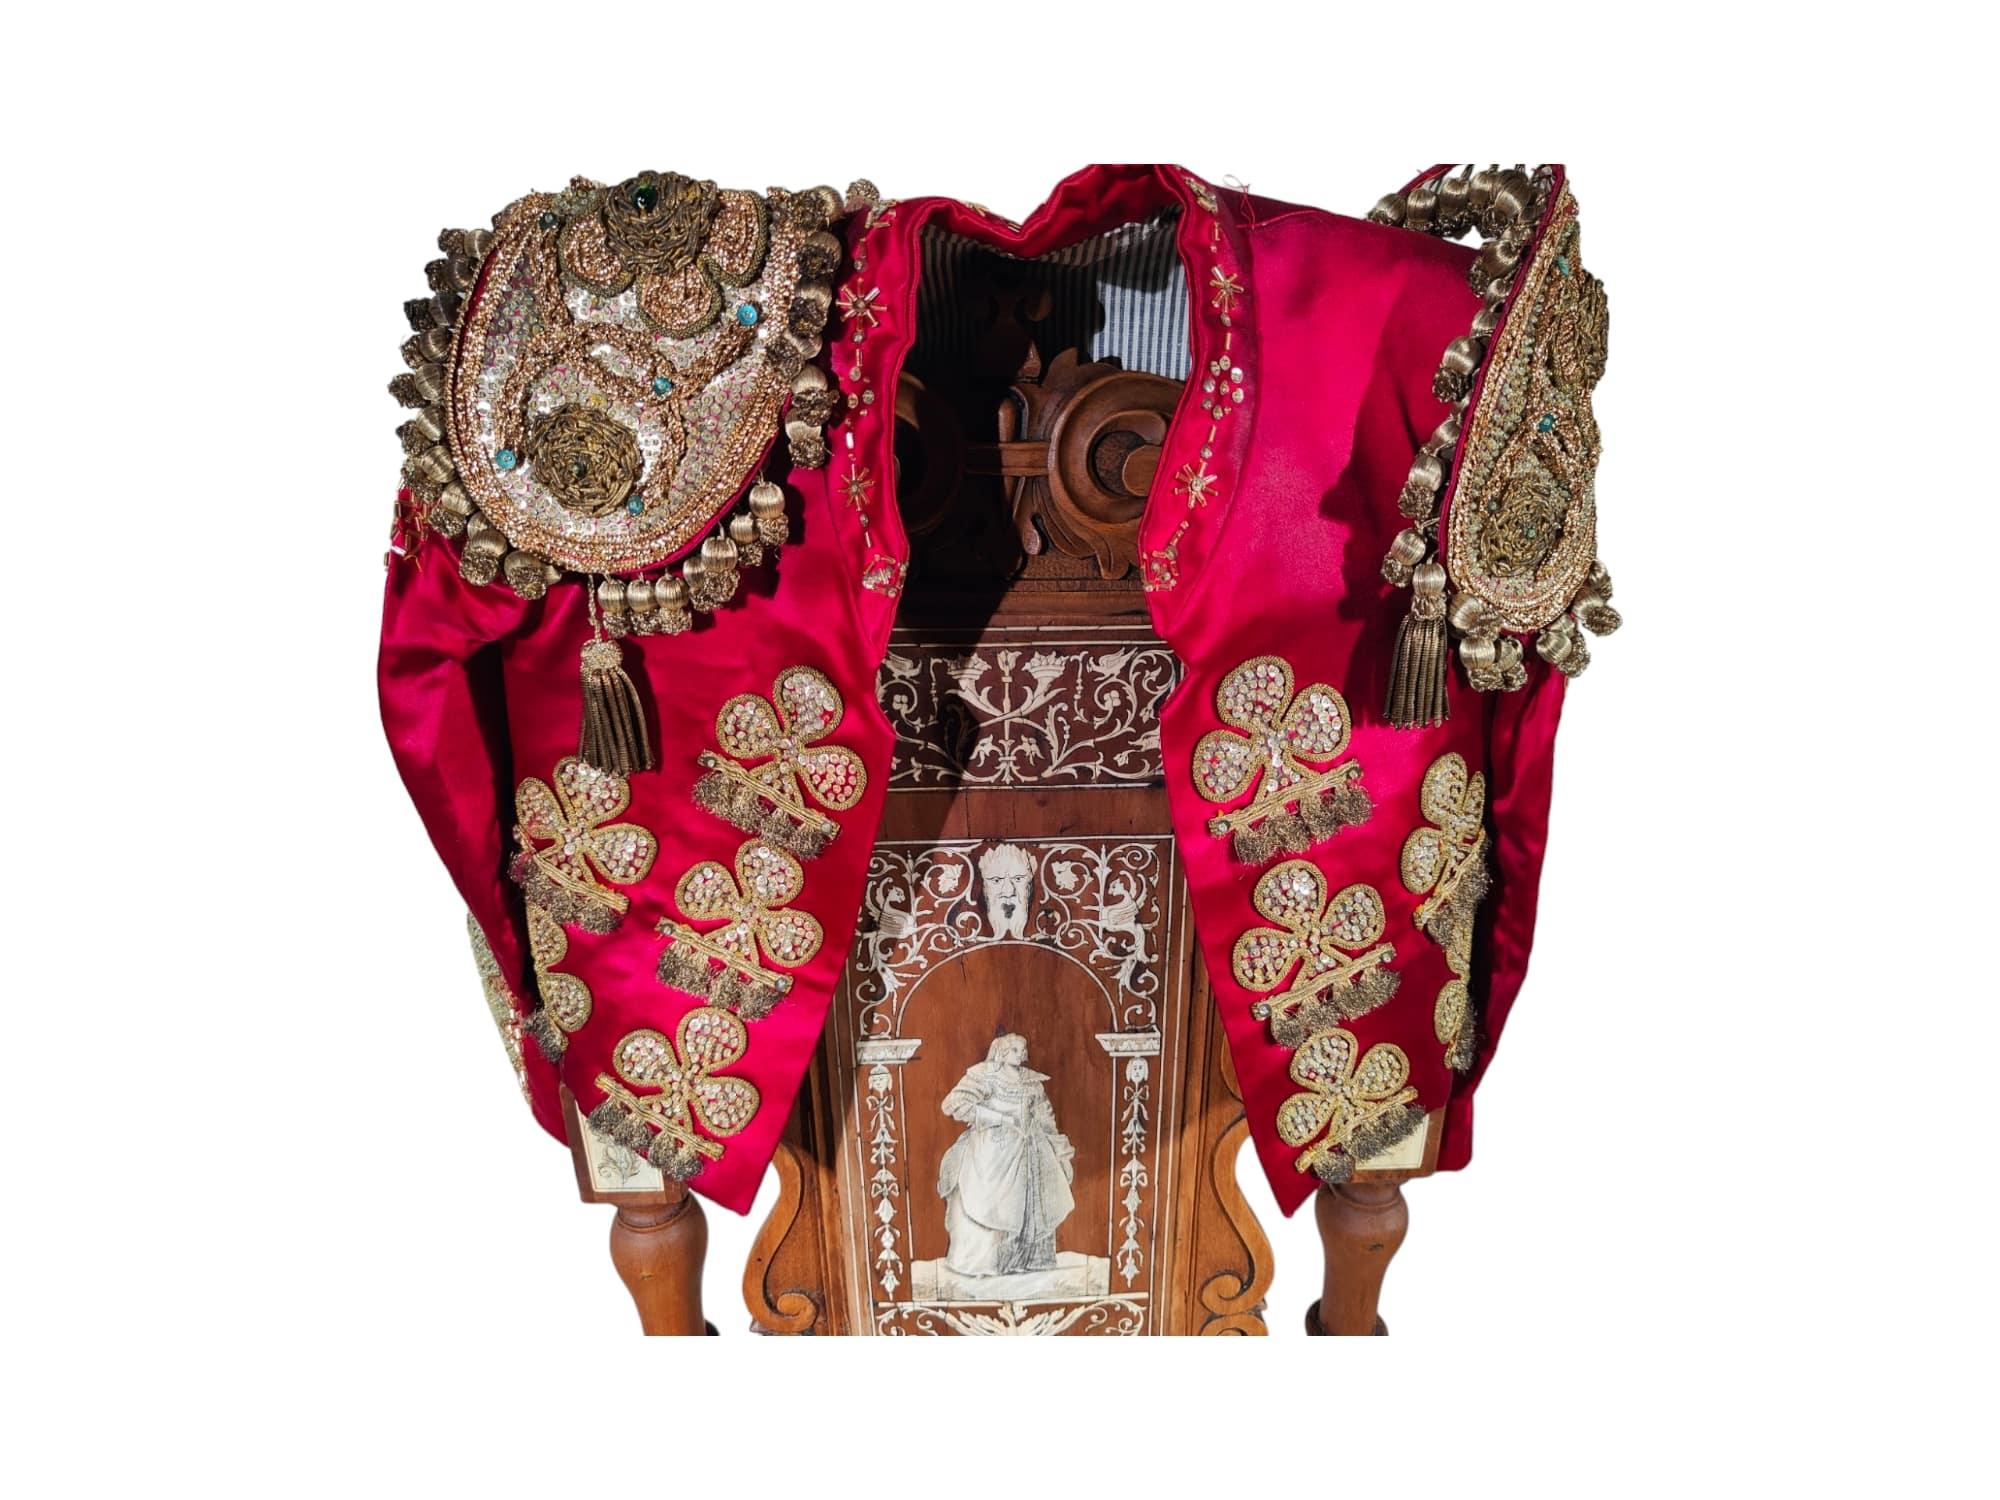 Bullfighter Costume for Children from the 20th Century - A Gem of Children's Bul For Sale 1